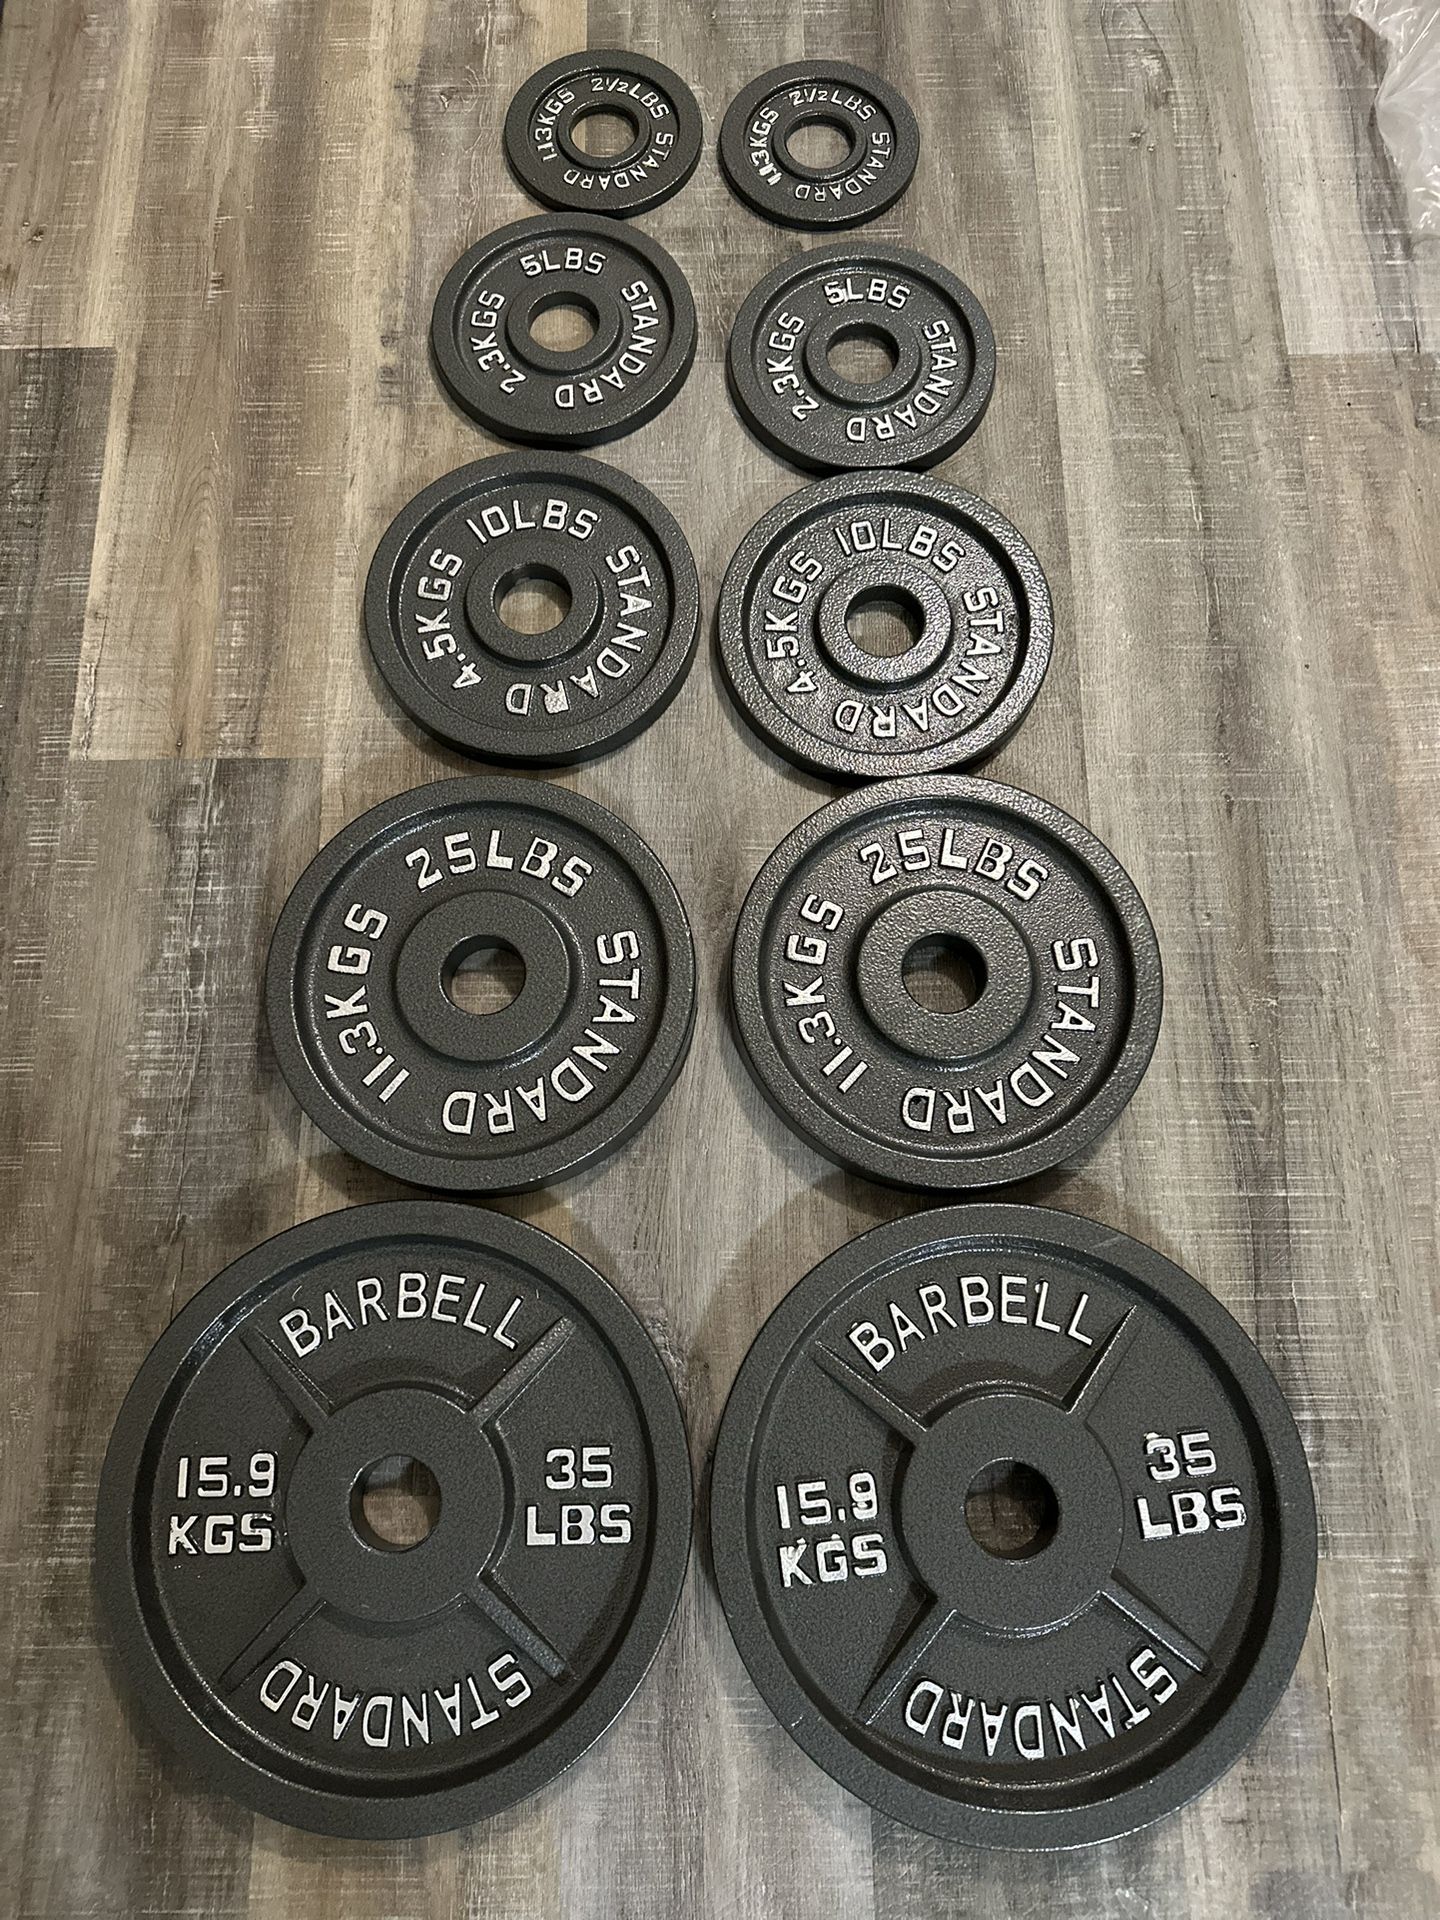 NEW OLYMPIC WEIGHTS PLATES